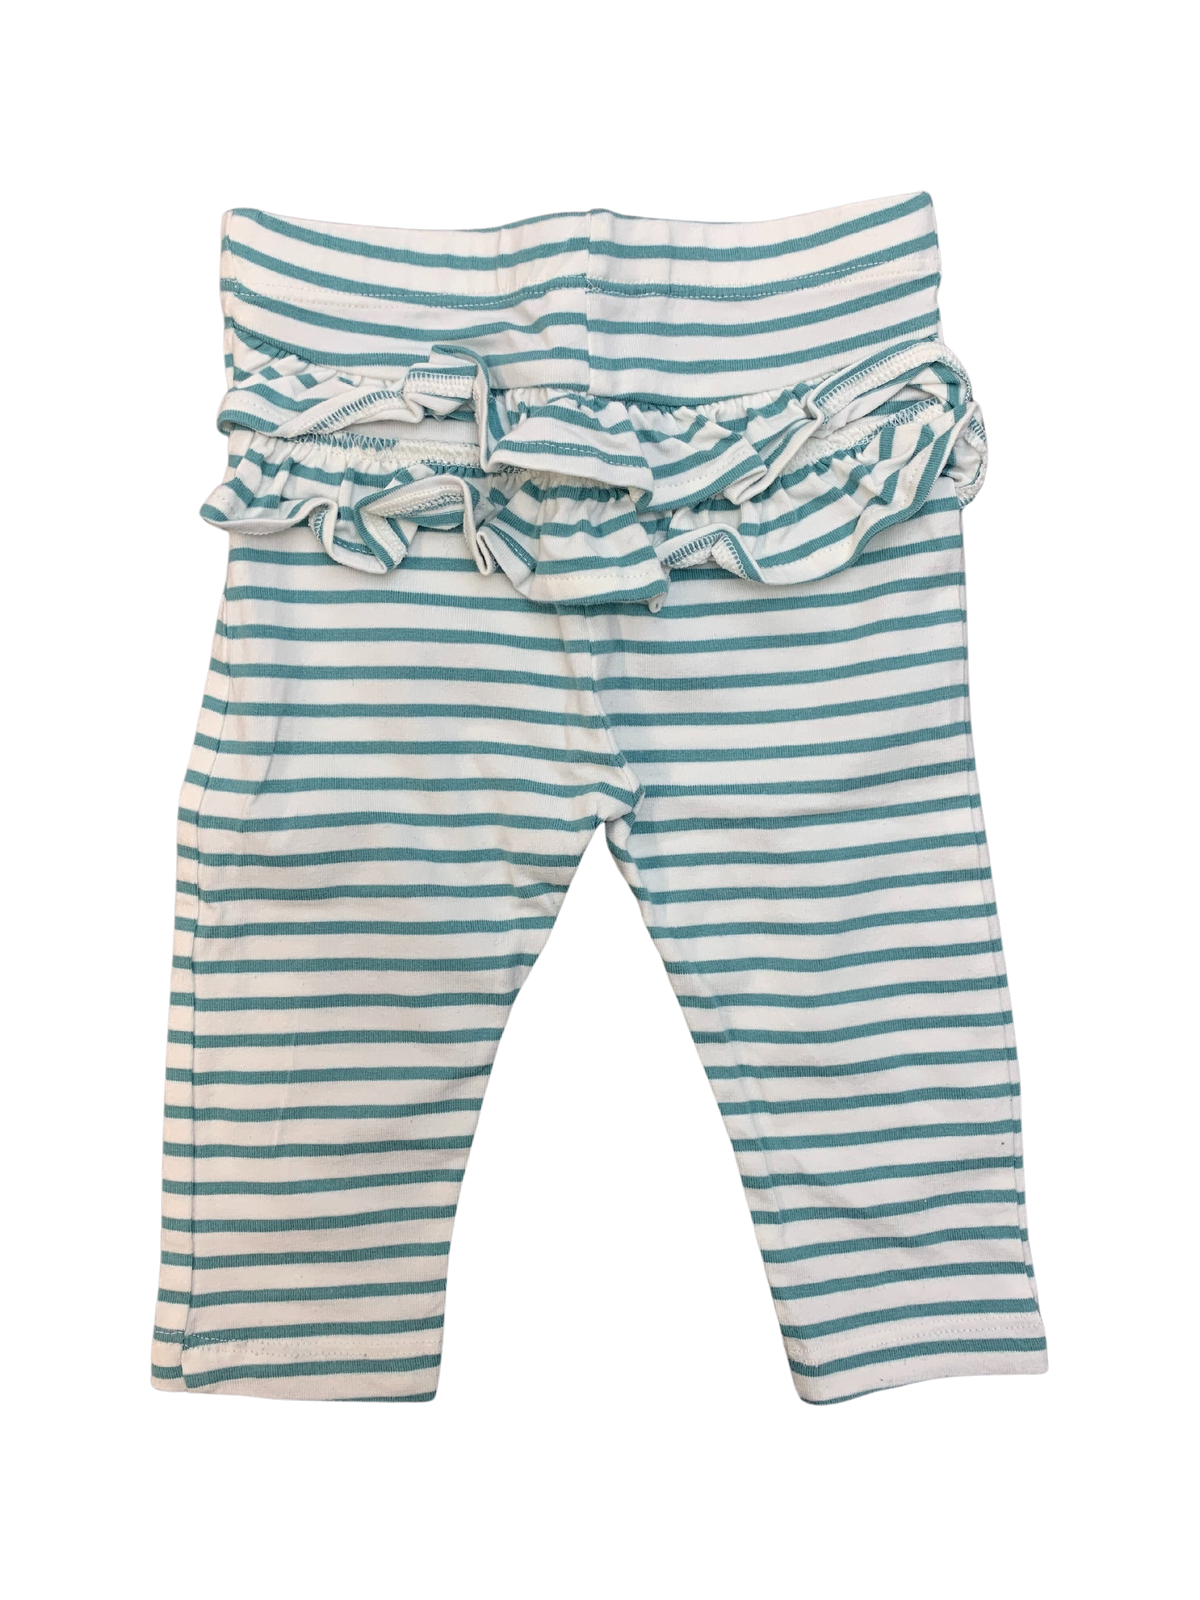 M&S Striped Leggings Baby Girl 3-6 Months/17lbs